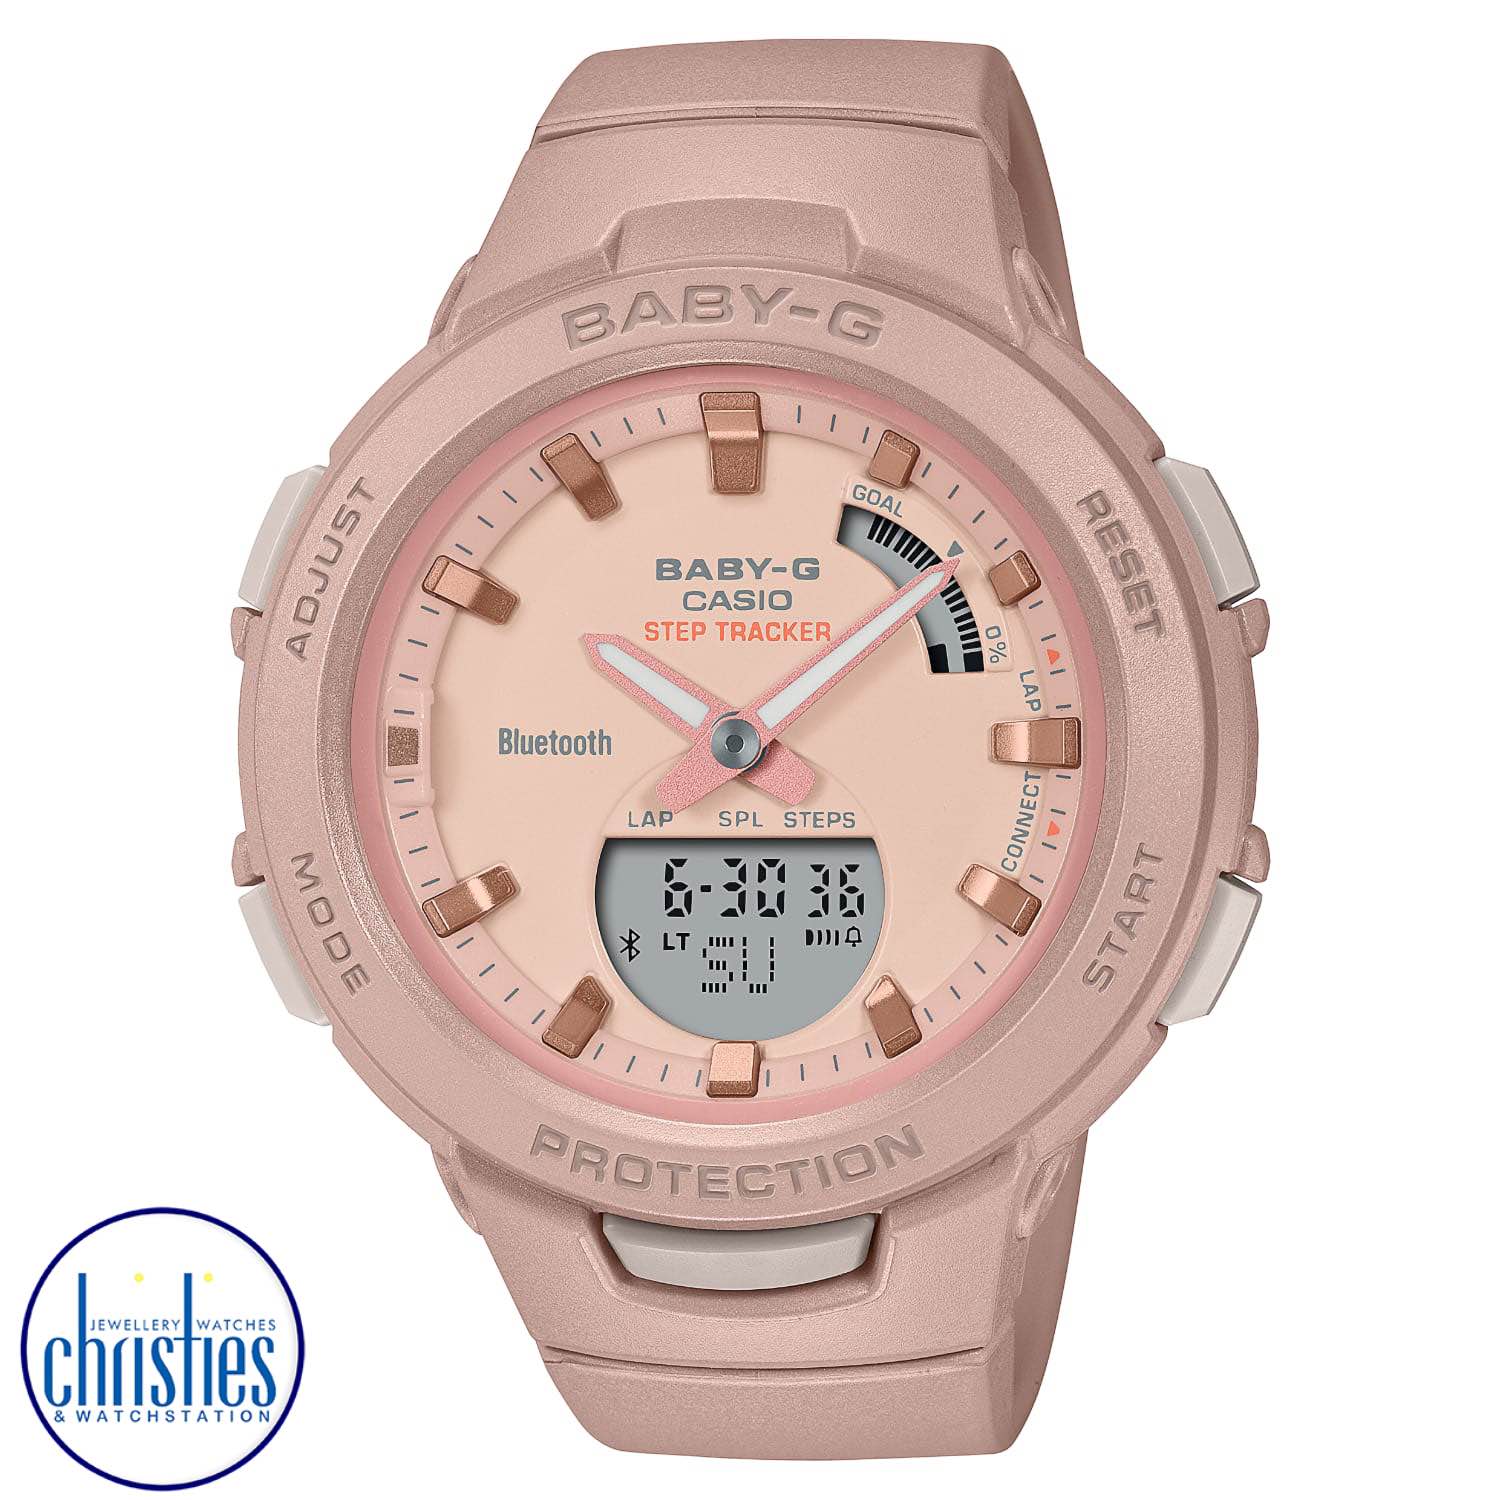 BSAB100CS-4A Casio Baby G-Squad Smartphone Link Watch. Indulge your love of BABY-G and your passion for working out with sports watches that sync with your mobile device to sweeten your daily workouts.